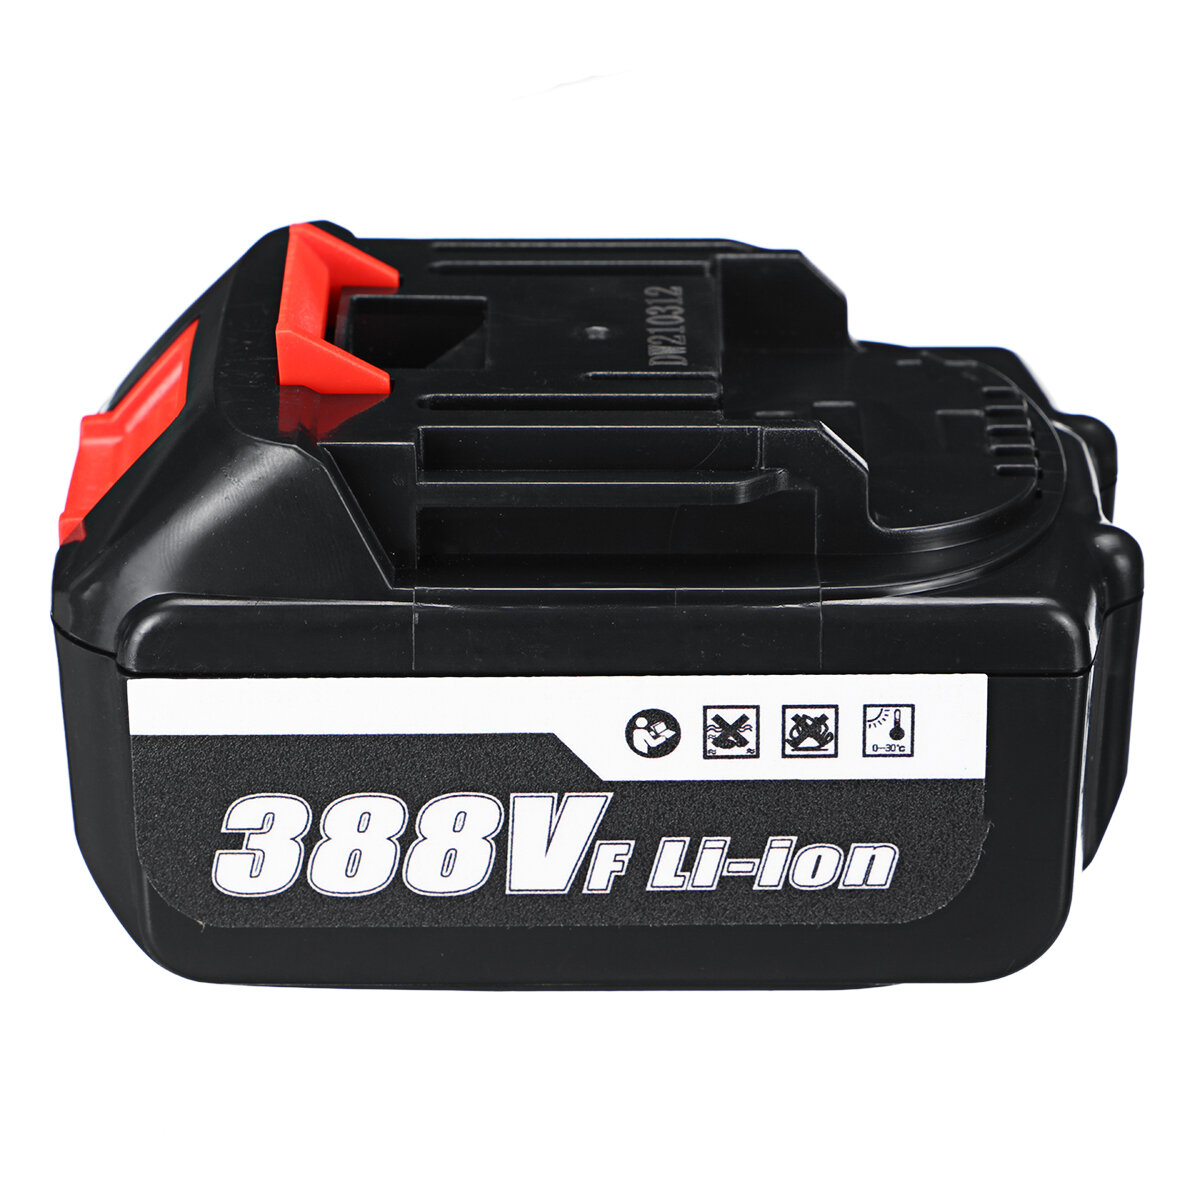 388v 18650 10000mAh Lithium-ion Battery For Tools Angle Grinder Electromechanical Drill